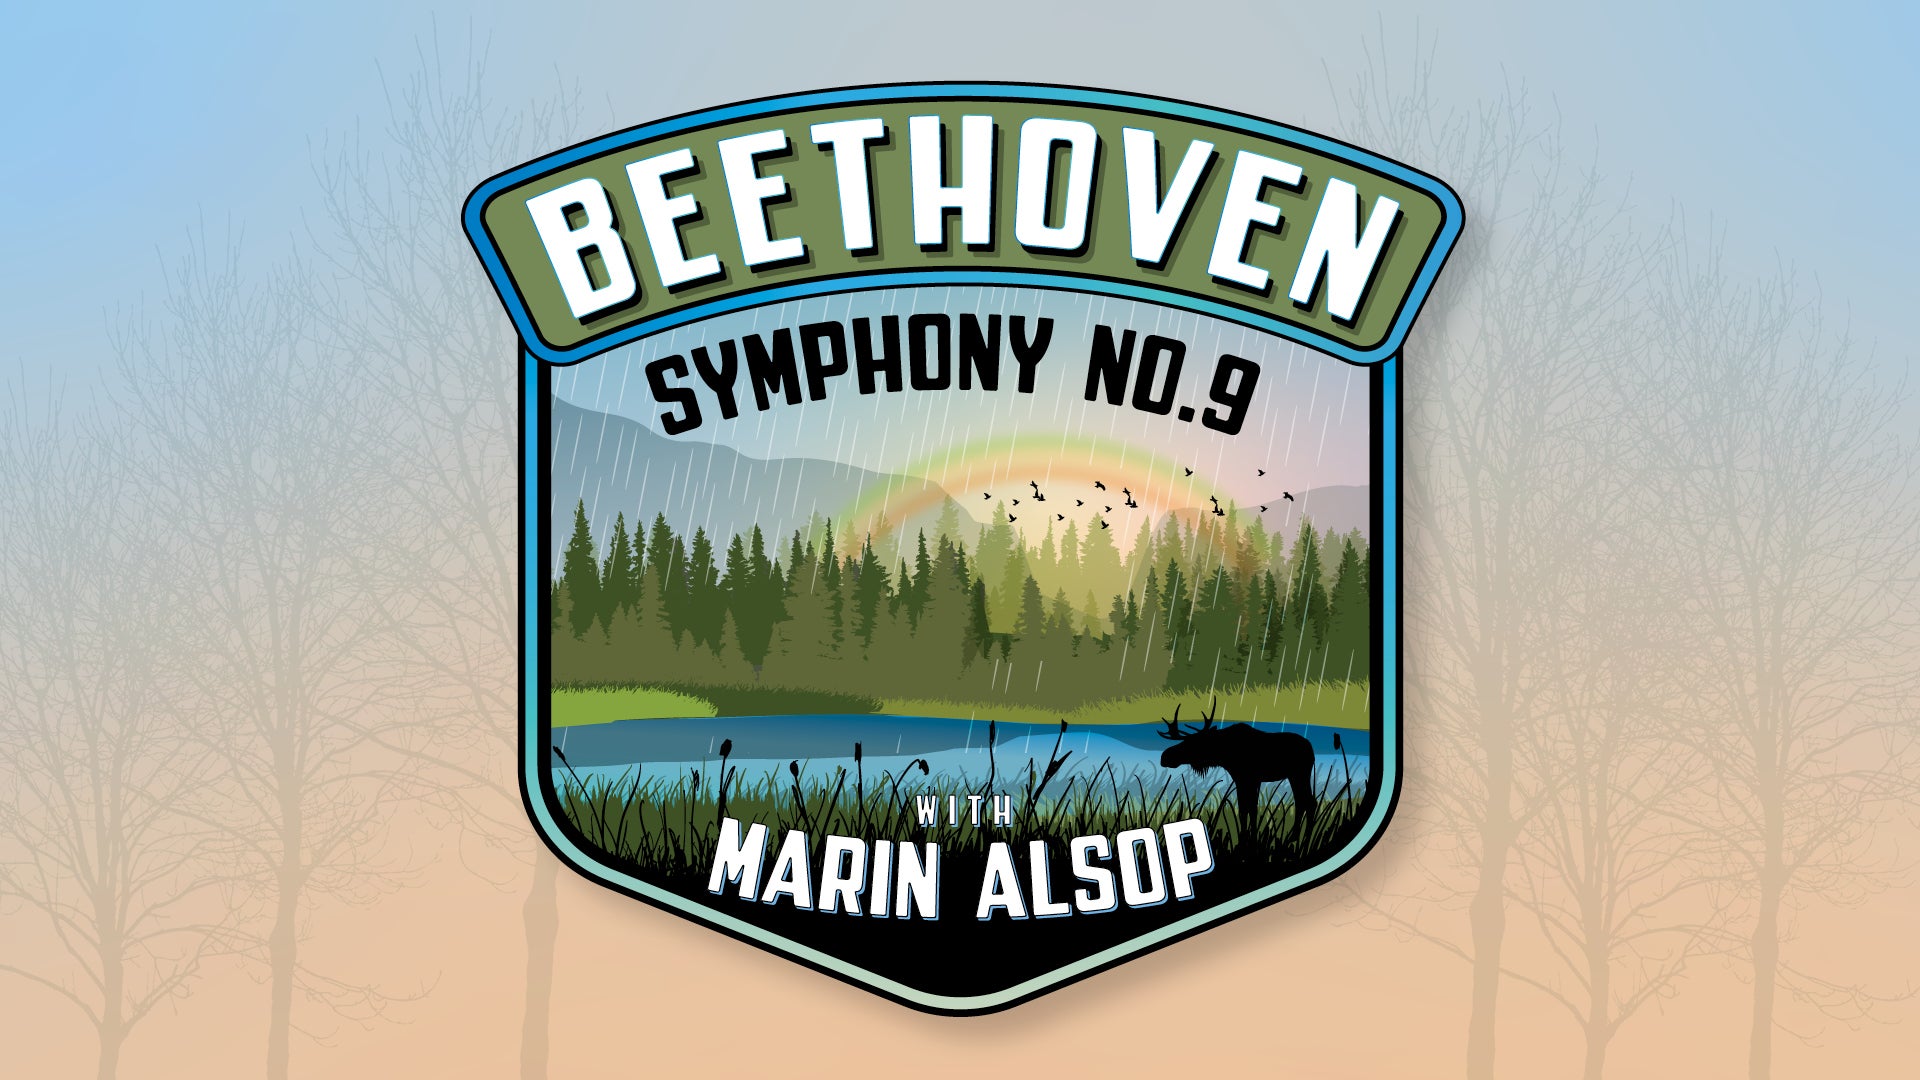 Beethoven's Ninth Symphony with Marin Alsop